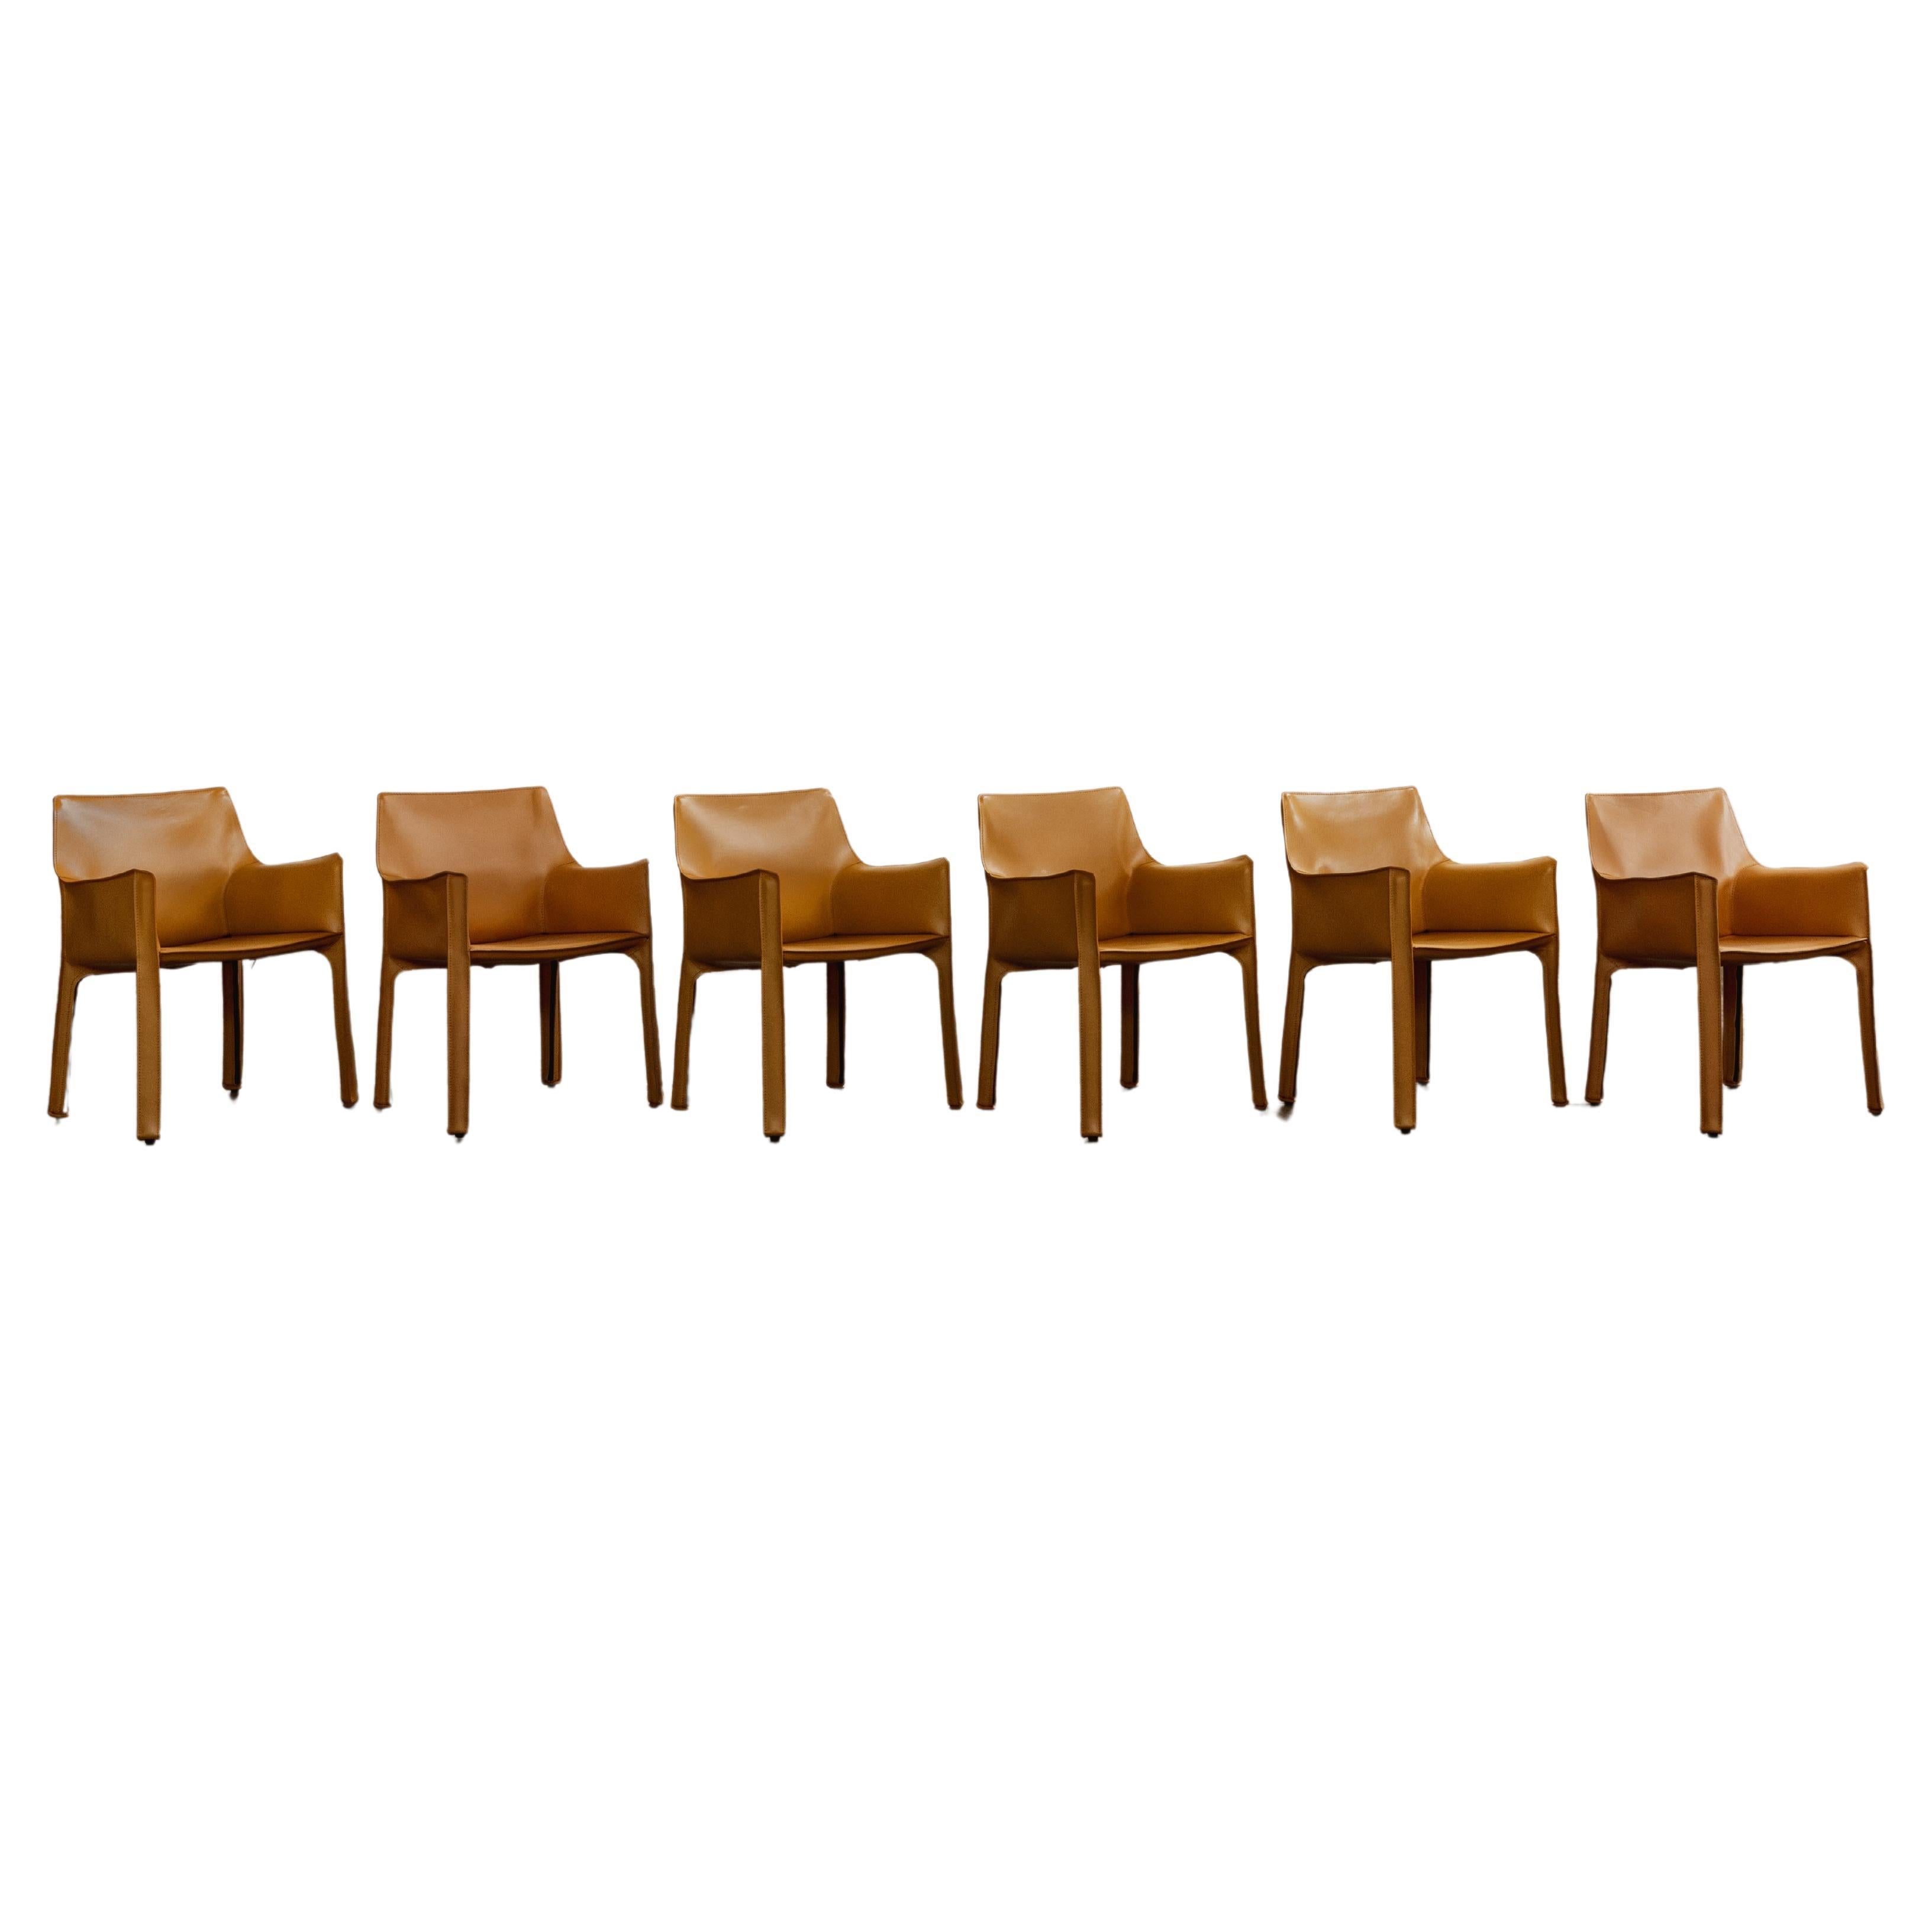 Mario Bellini "CAB 413" Dining Chairs for Cassina, 1977, Set of 6